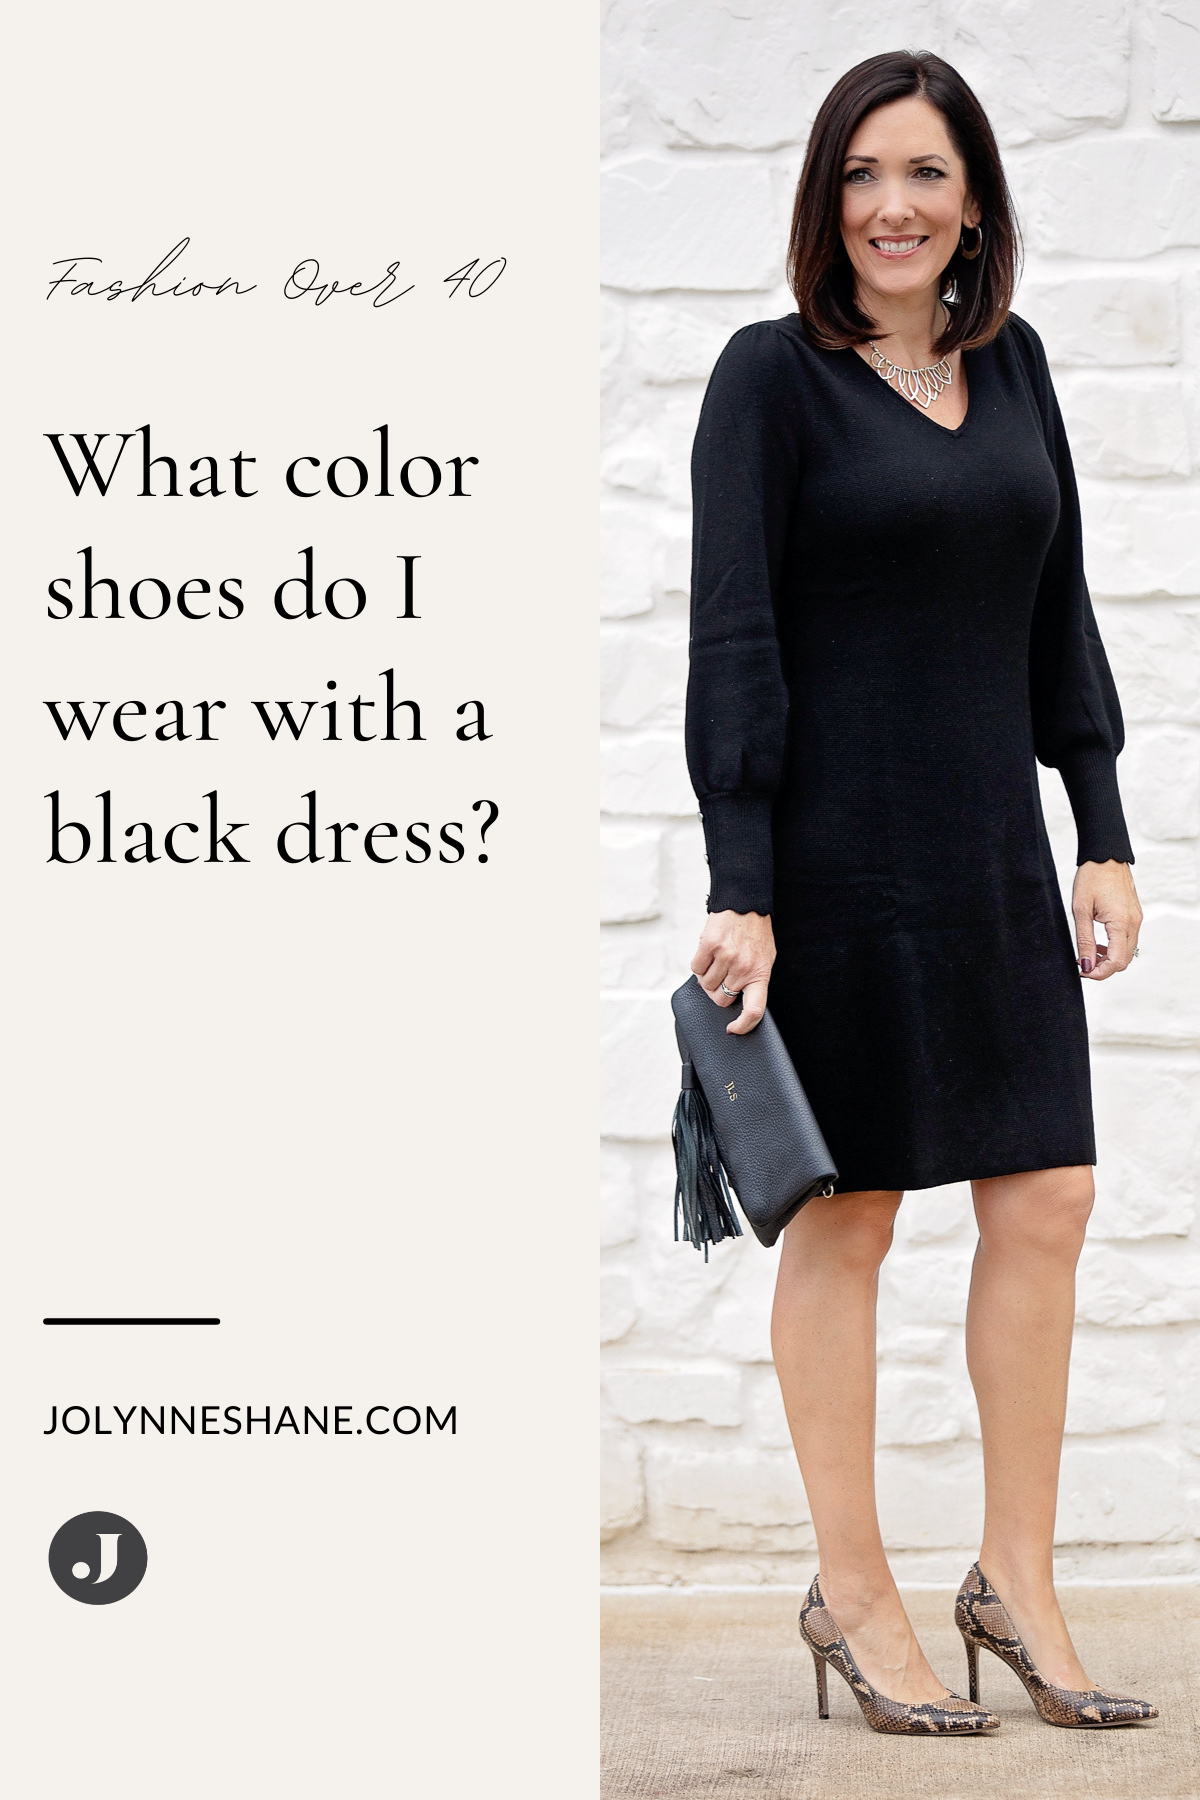 What color shoes to wear with black dress to wedding